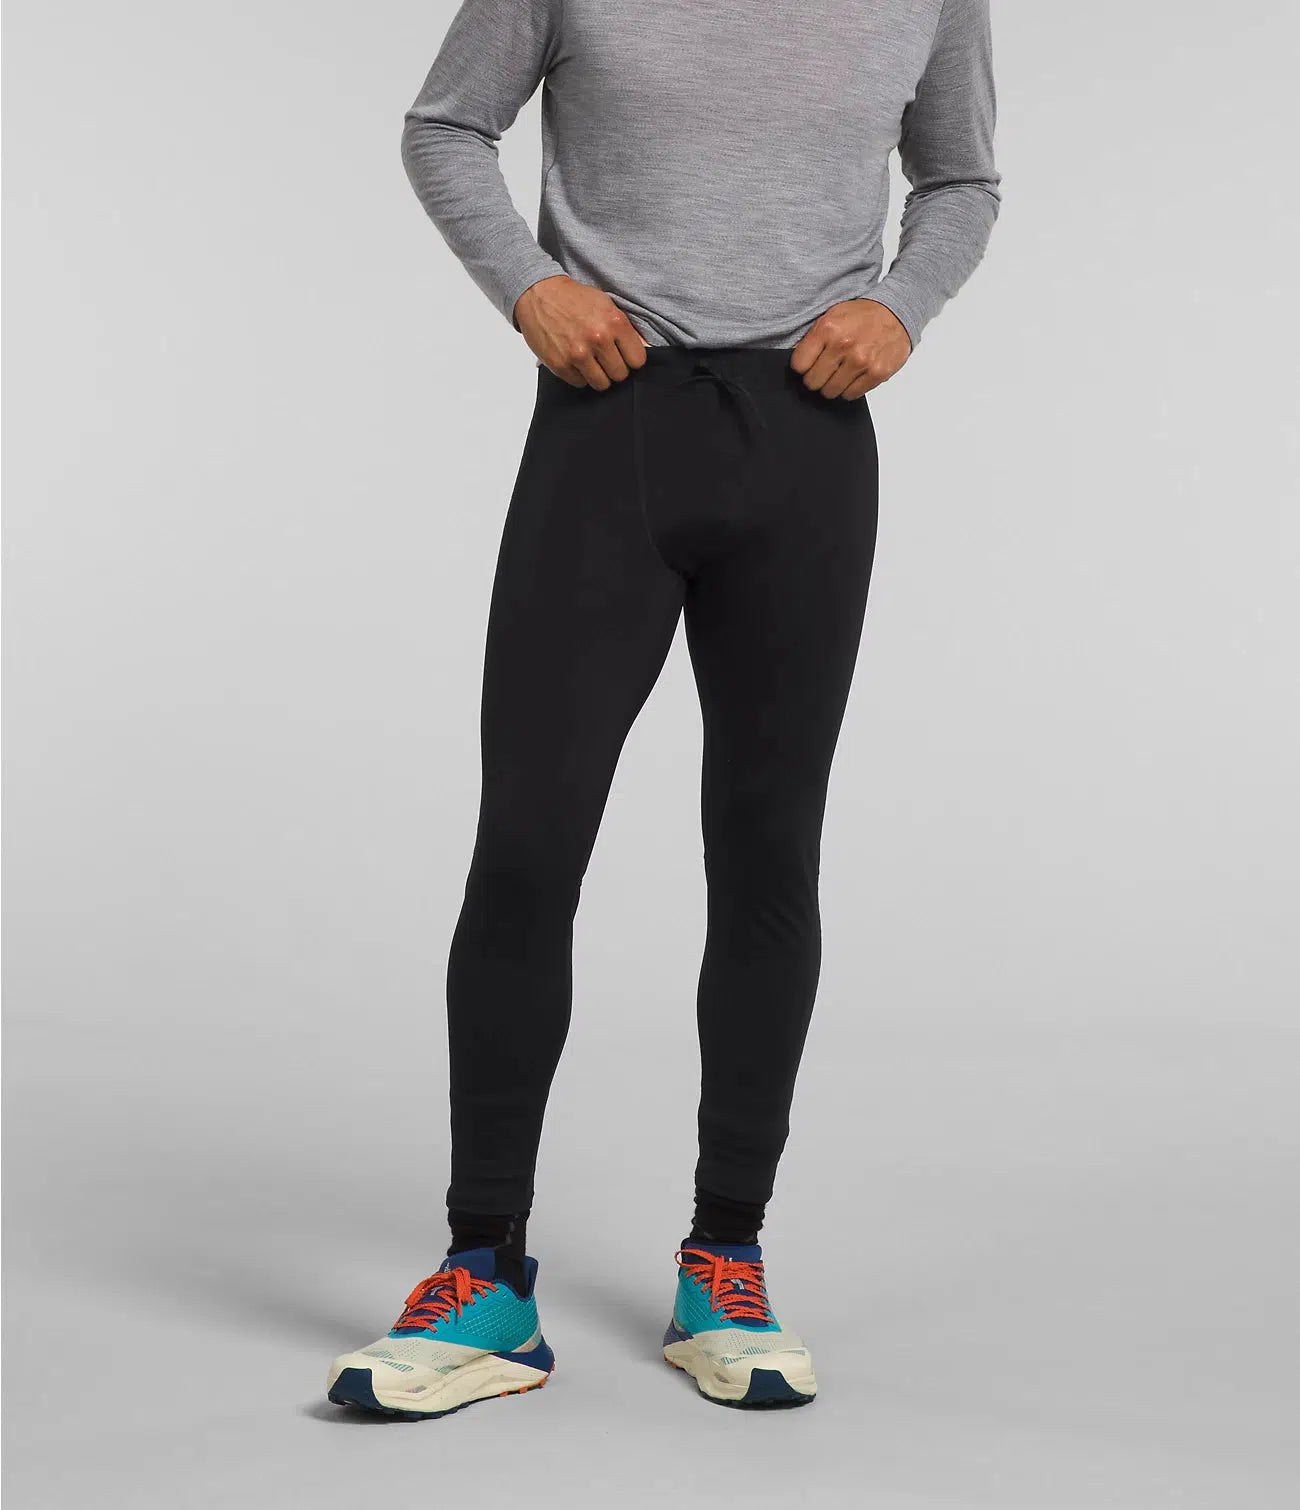 The north face yoga pants + FREE SHIPPING